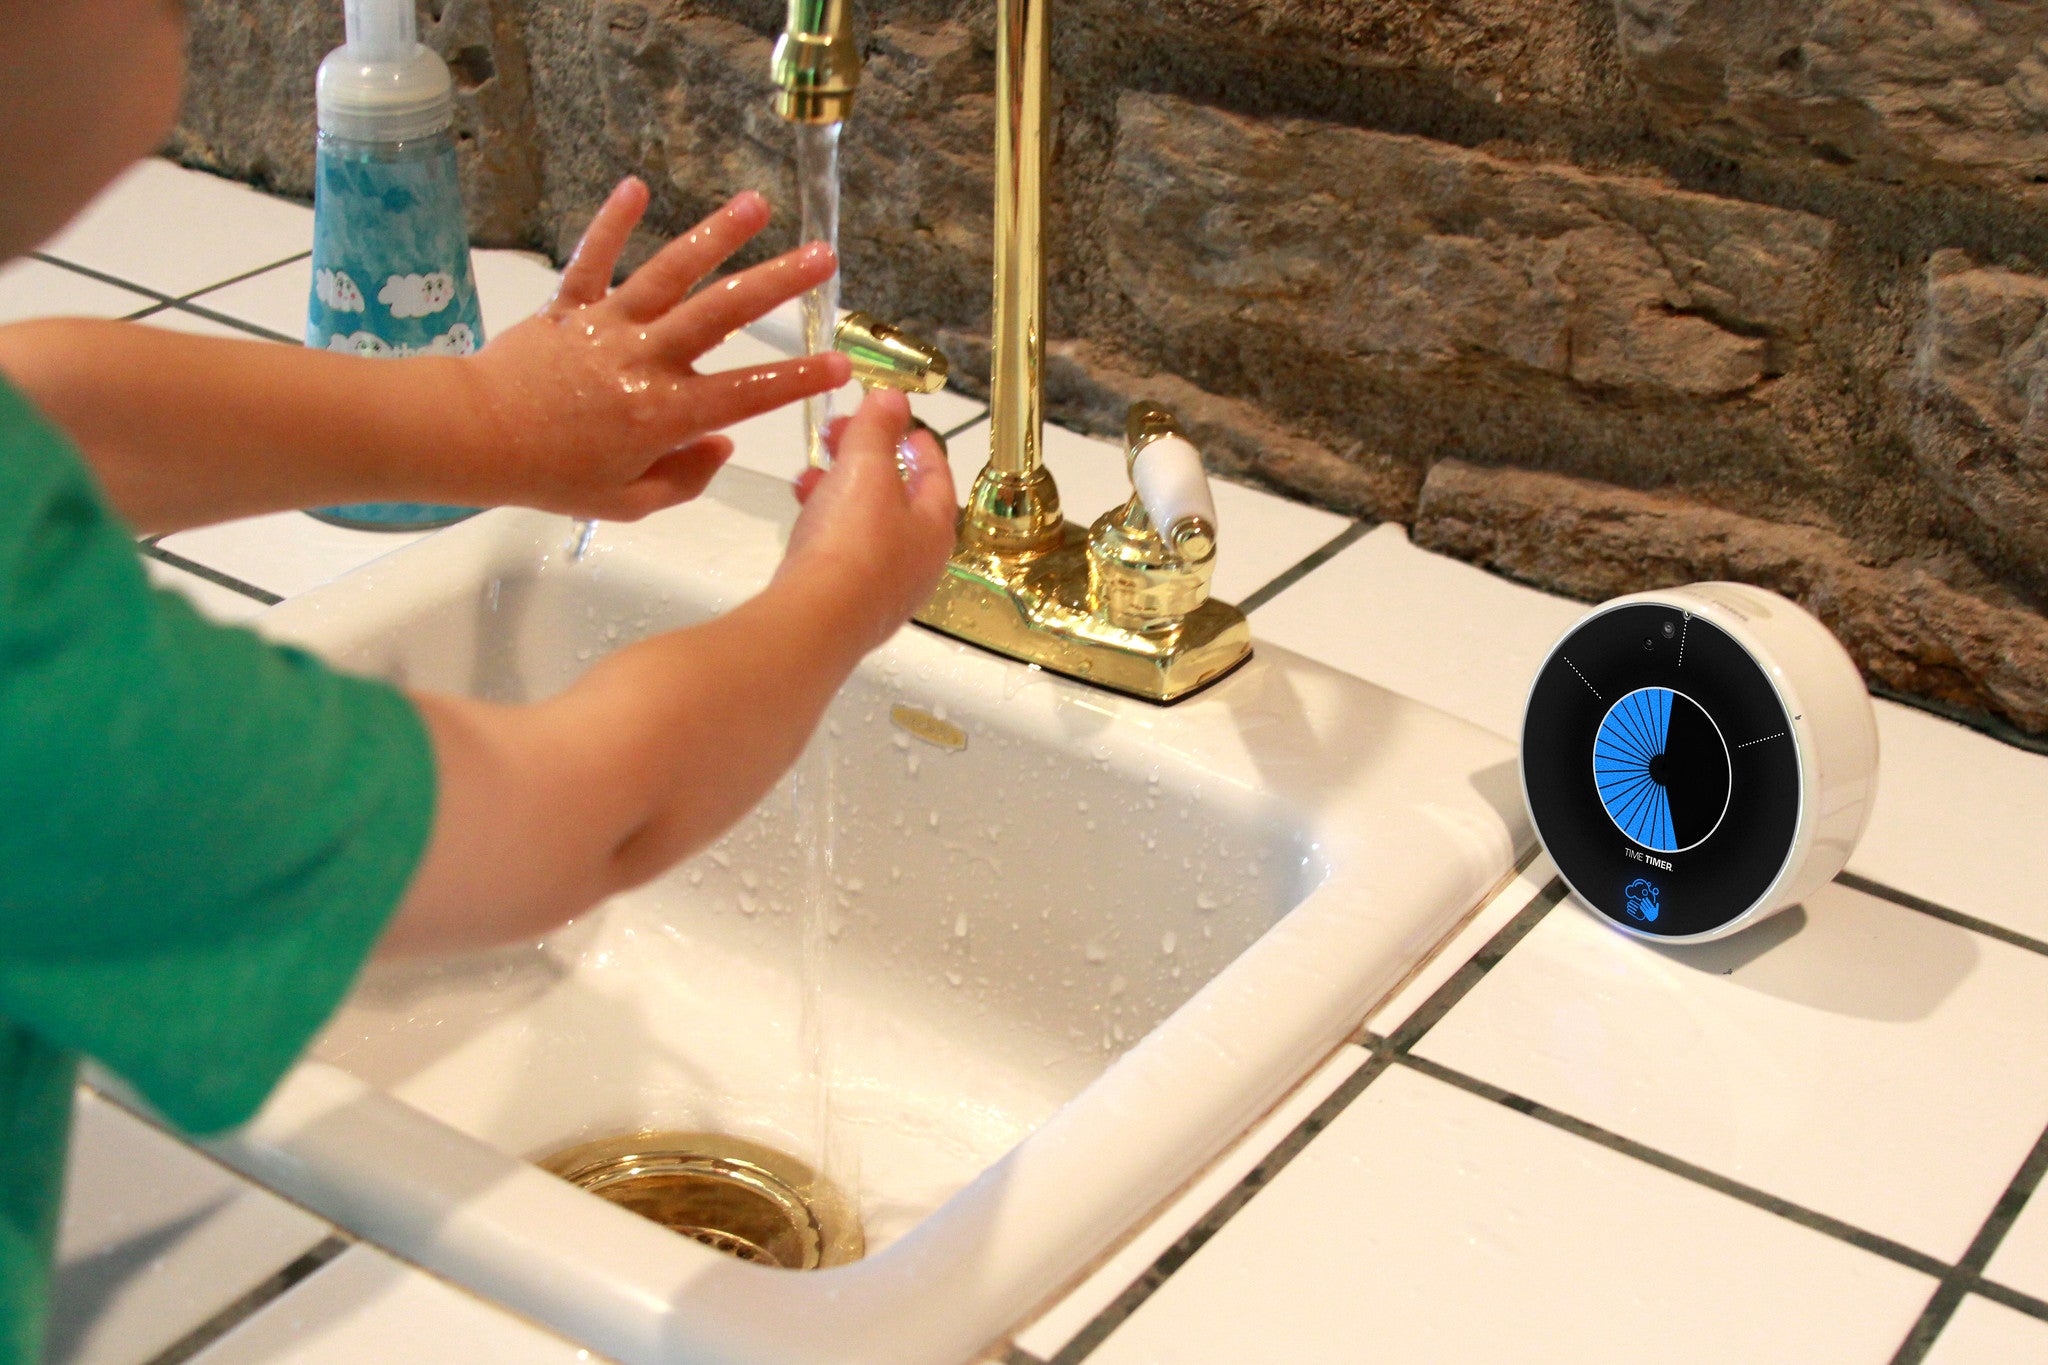 A child with light skin tone stands at a sink with their hands under running water. The Time Timer WASH sits to the right of the sink.